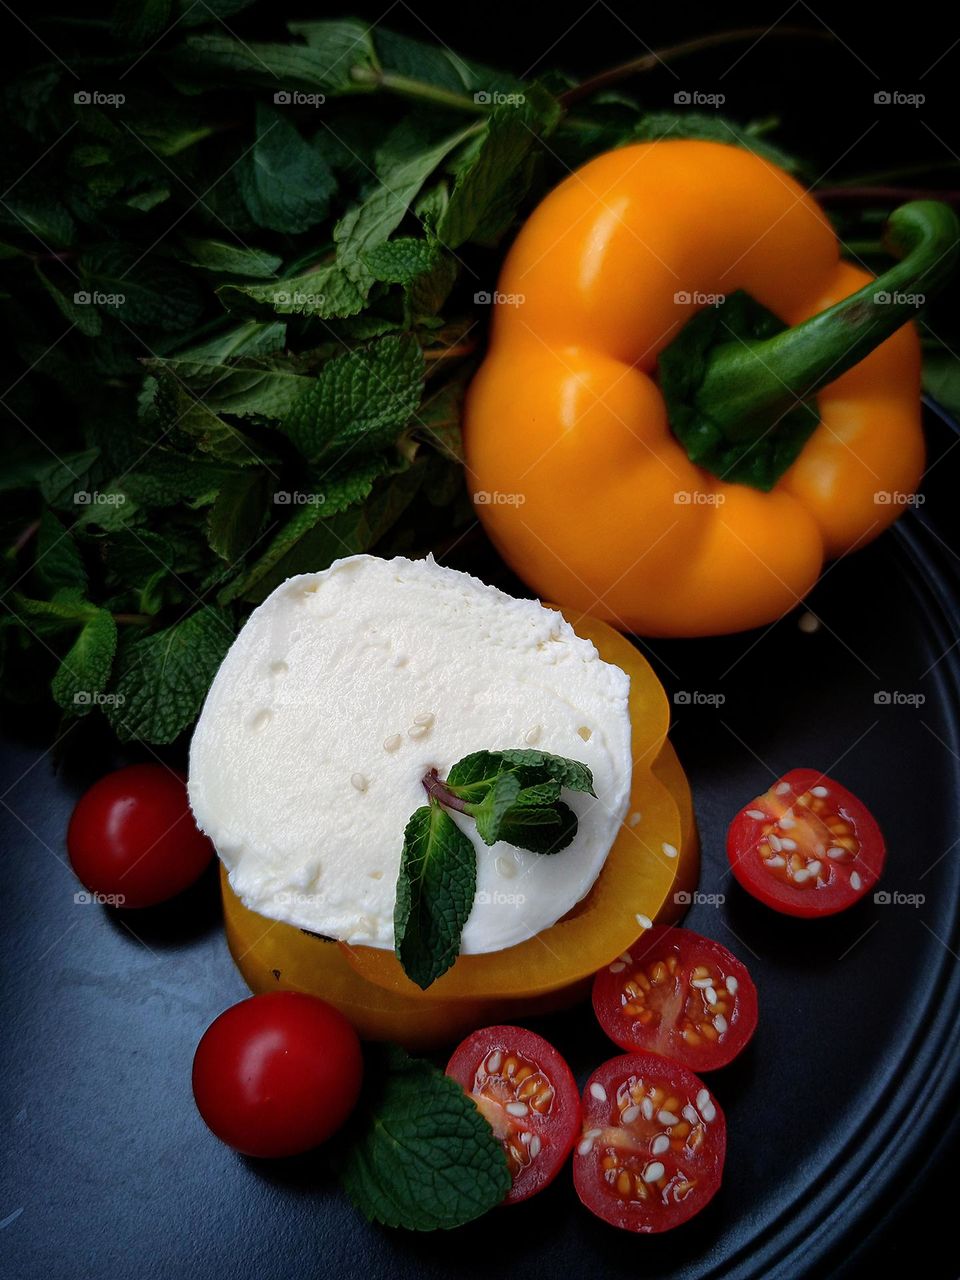 Still life: white burrato cheese lies on mugs of yellow bell pepper.  Nearby are cut red tomatoes and red tomatoes, yellow bell pepper, which closes a bunch of green mint.  Cheese and tomatoes sprinkled with sesame seeds.  Black background